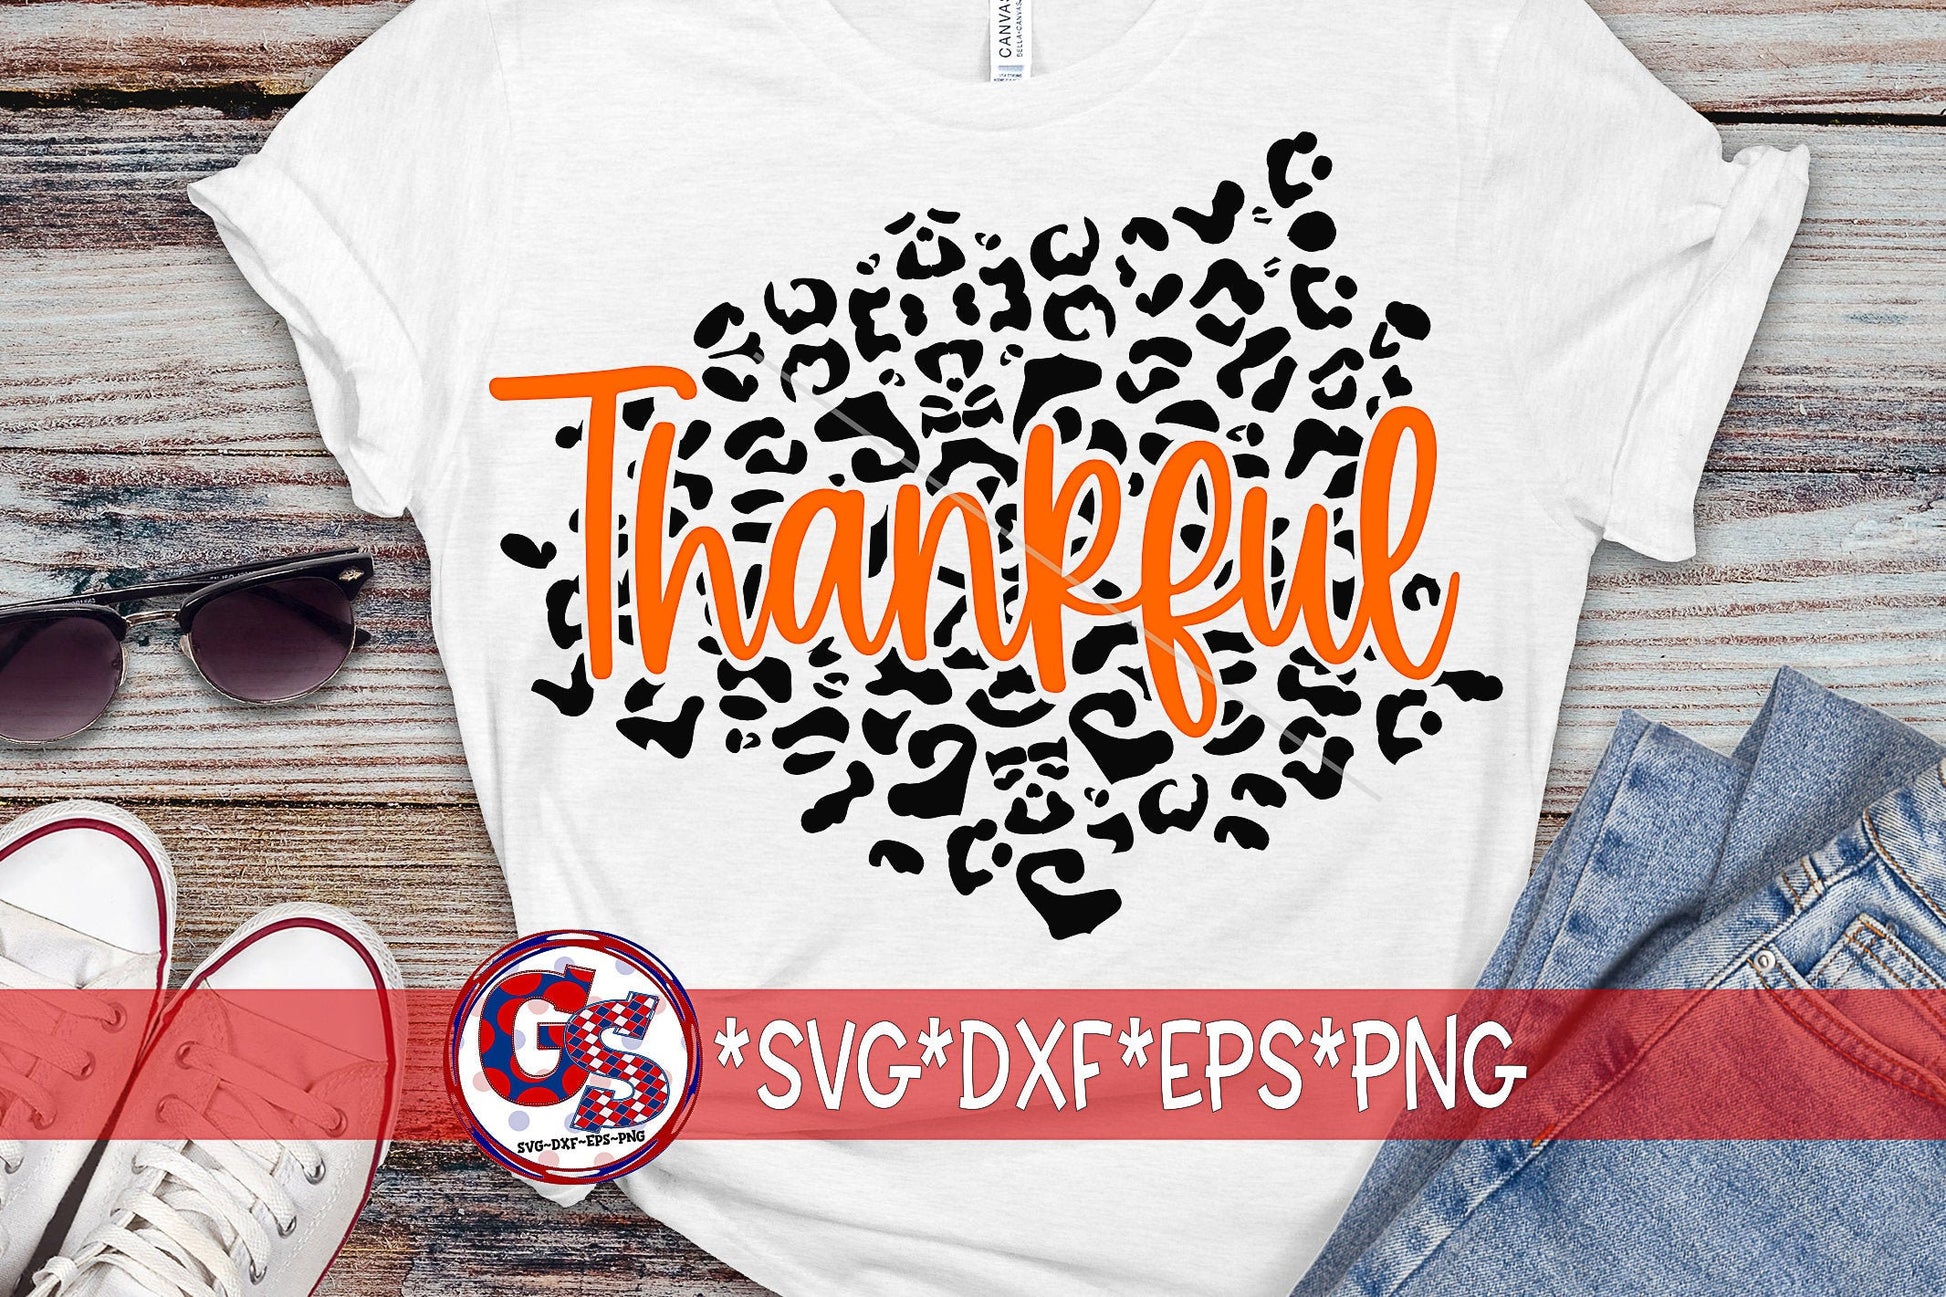 Thankful Leopard Print svg dxf eps png. Fall DxF | Thanksgiving SvG | Fall | Thankful SvG | Thanksgiving SvG | Instant Download Cut File